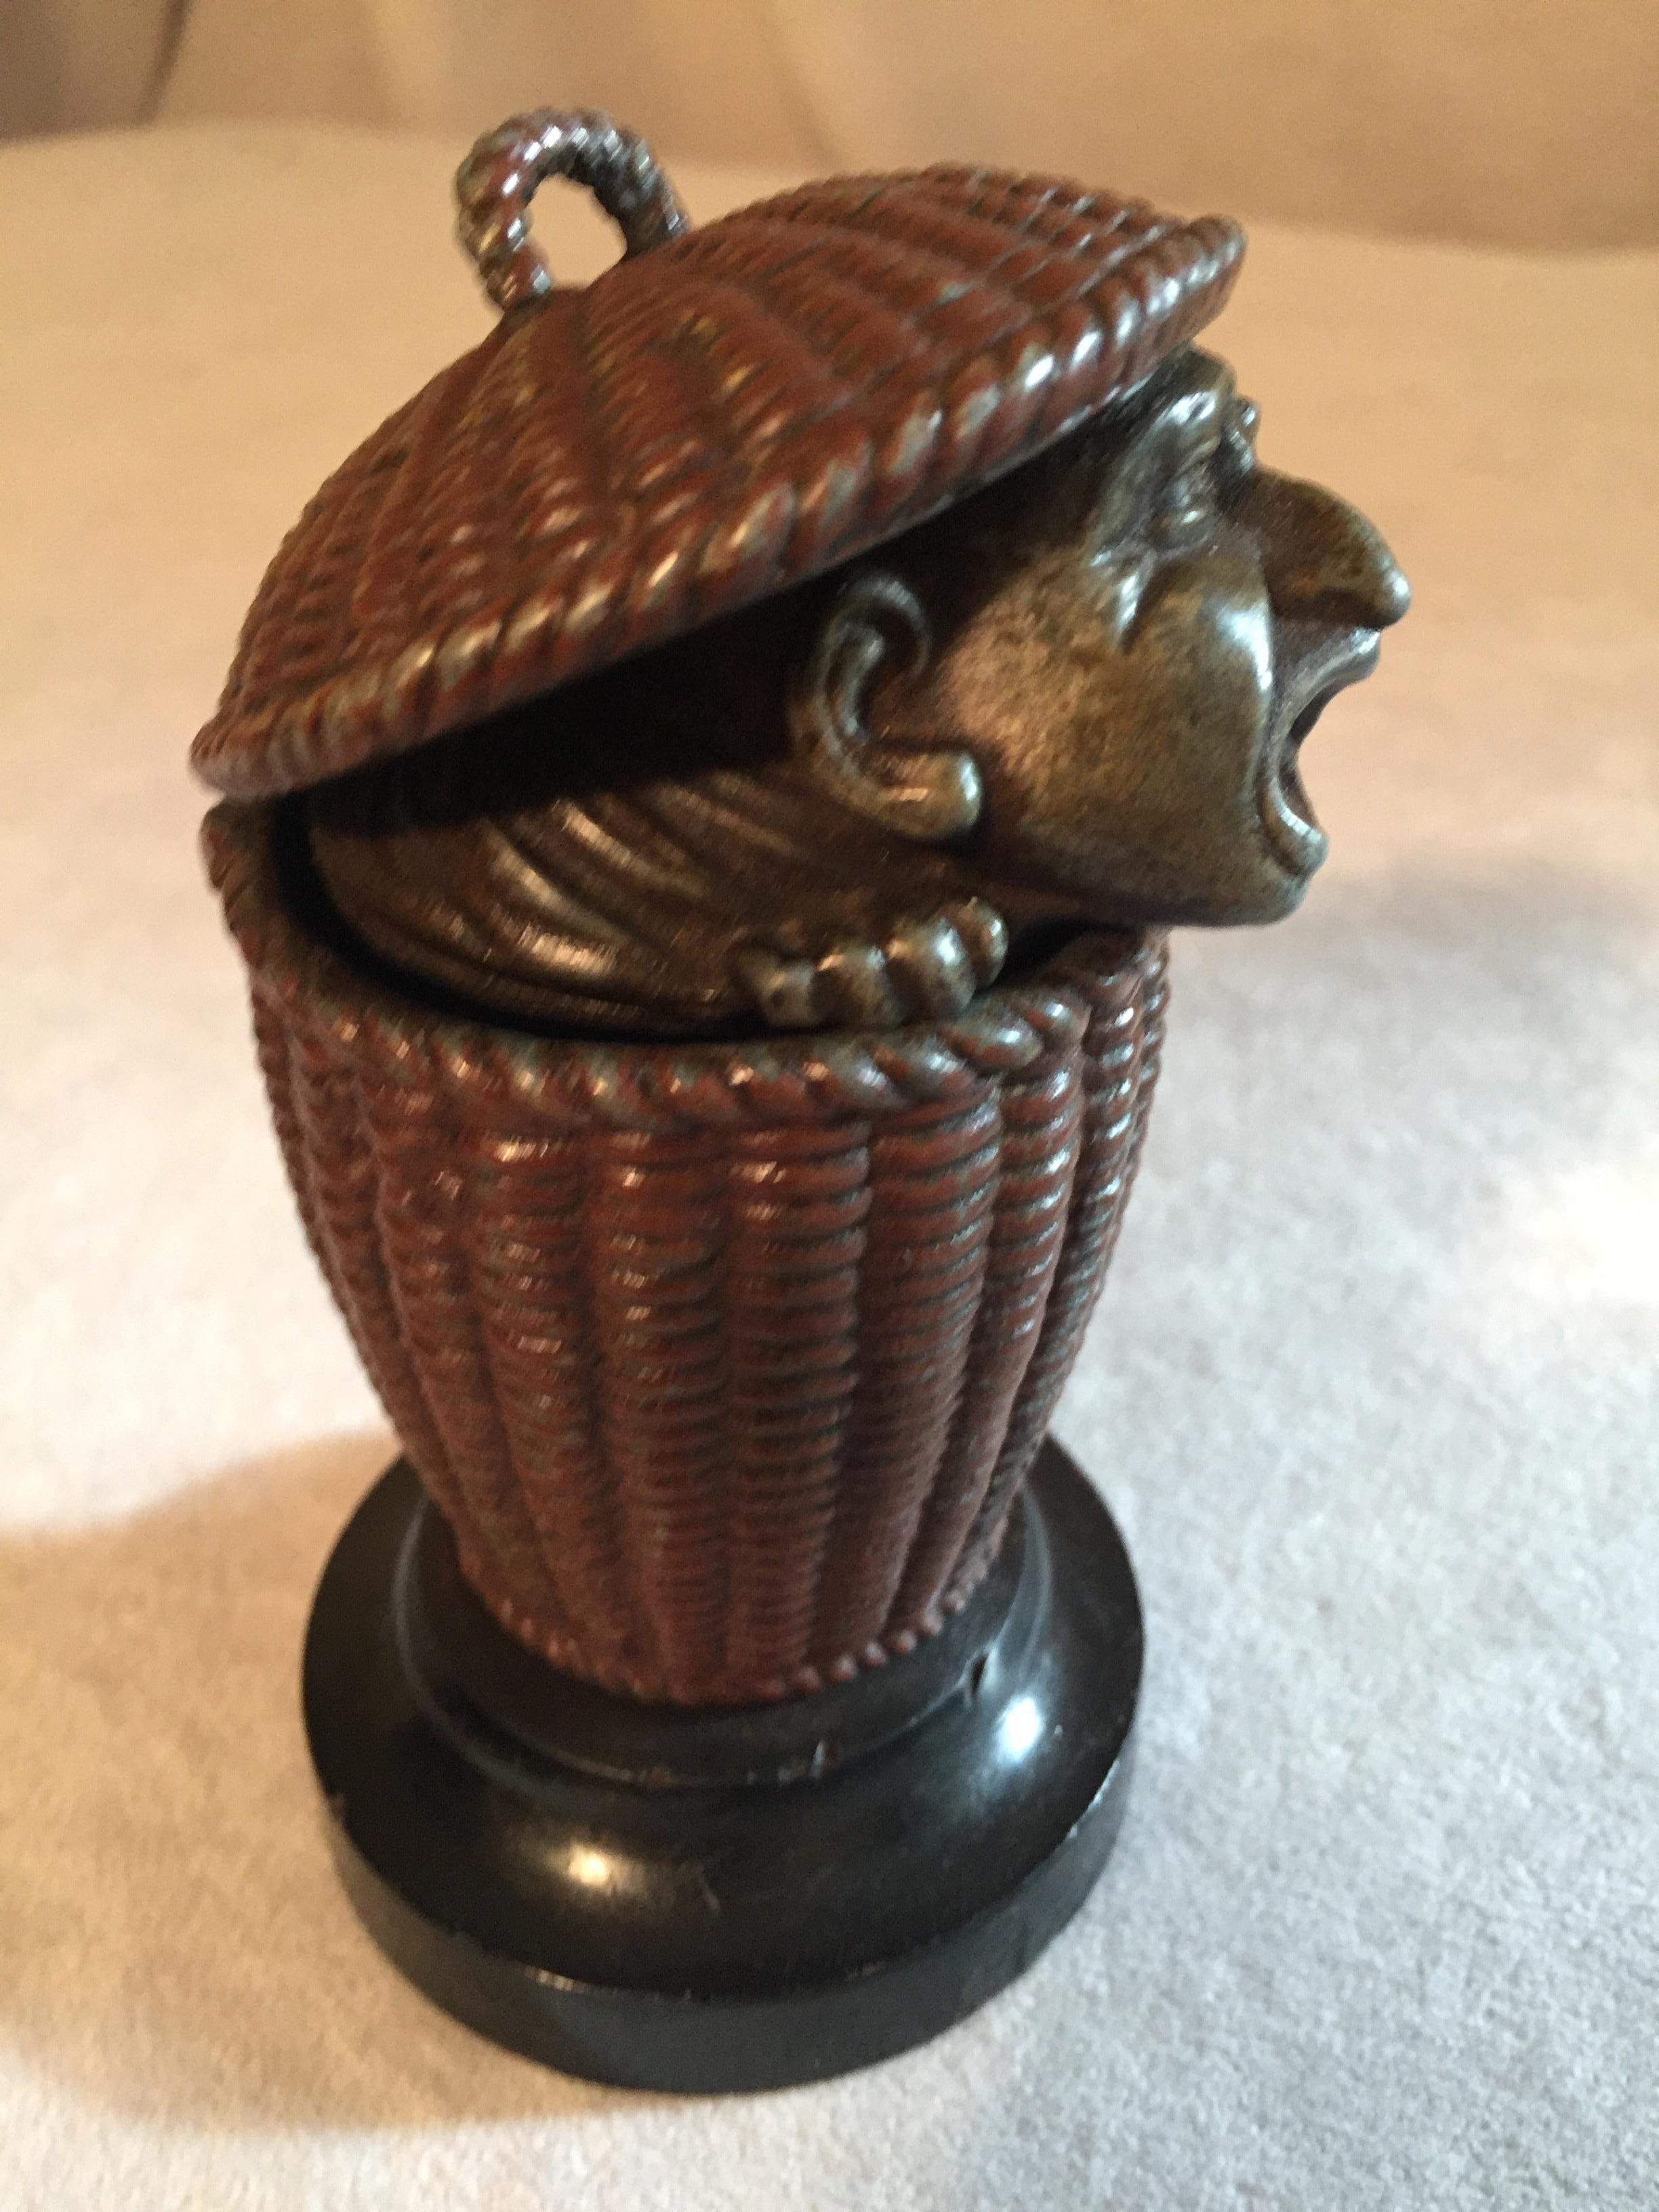 Hand-Crafted Antique Match Safe with Man Peeking Out of a Basket